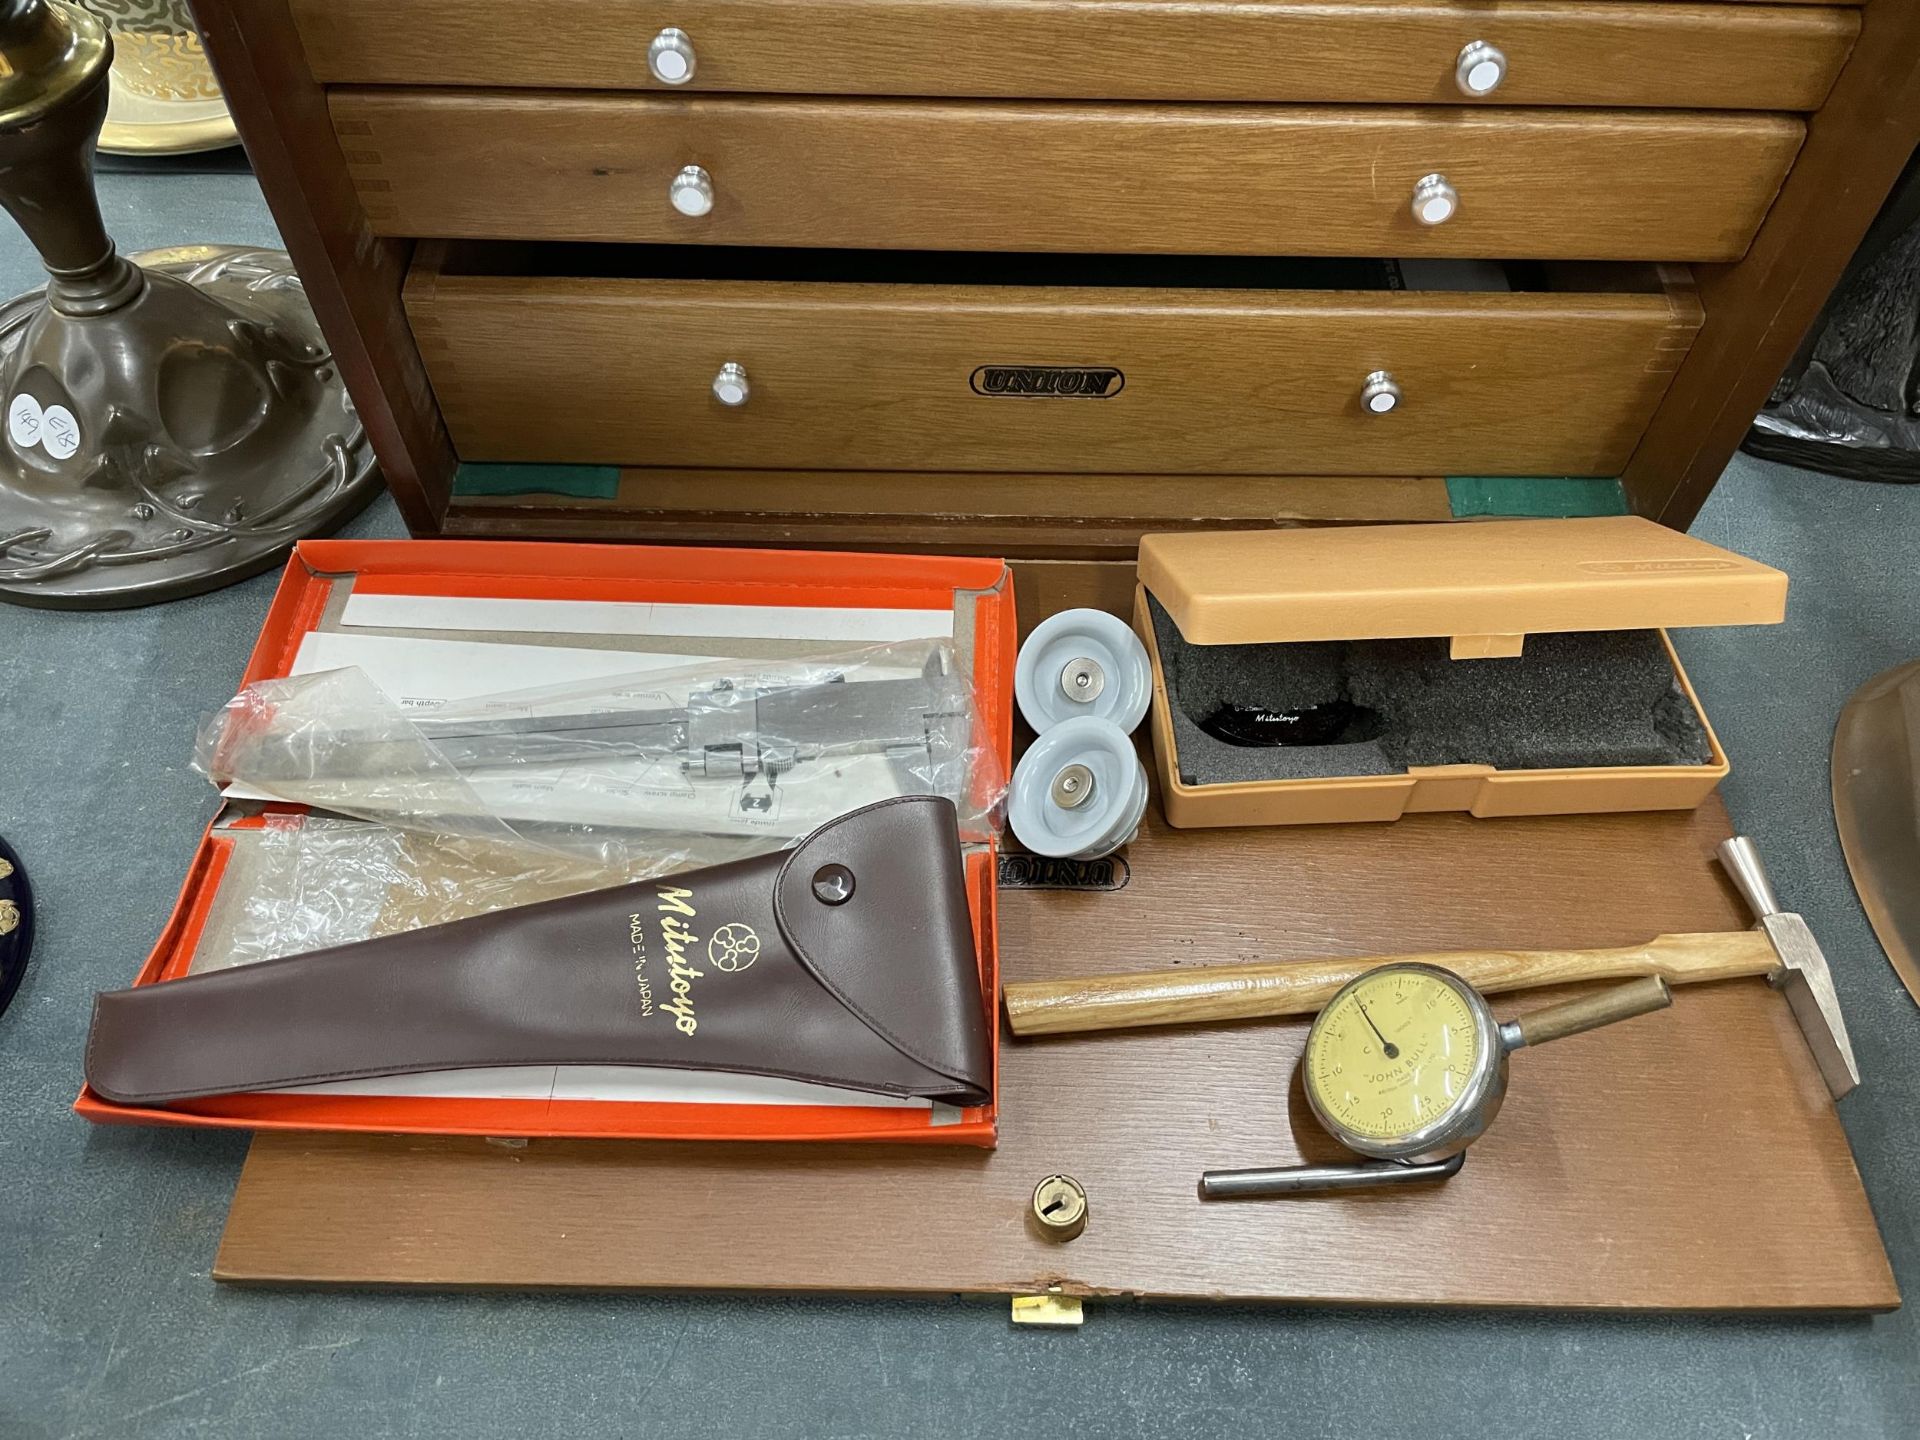 A UNION ENGINEERS CHEST WITH FIVE GRADUATED DRAWERS AND TOOLS TO INCLUDE GAUGES, CALIPERS, HAMMER - Bild 3 aus 6